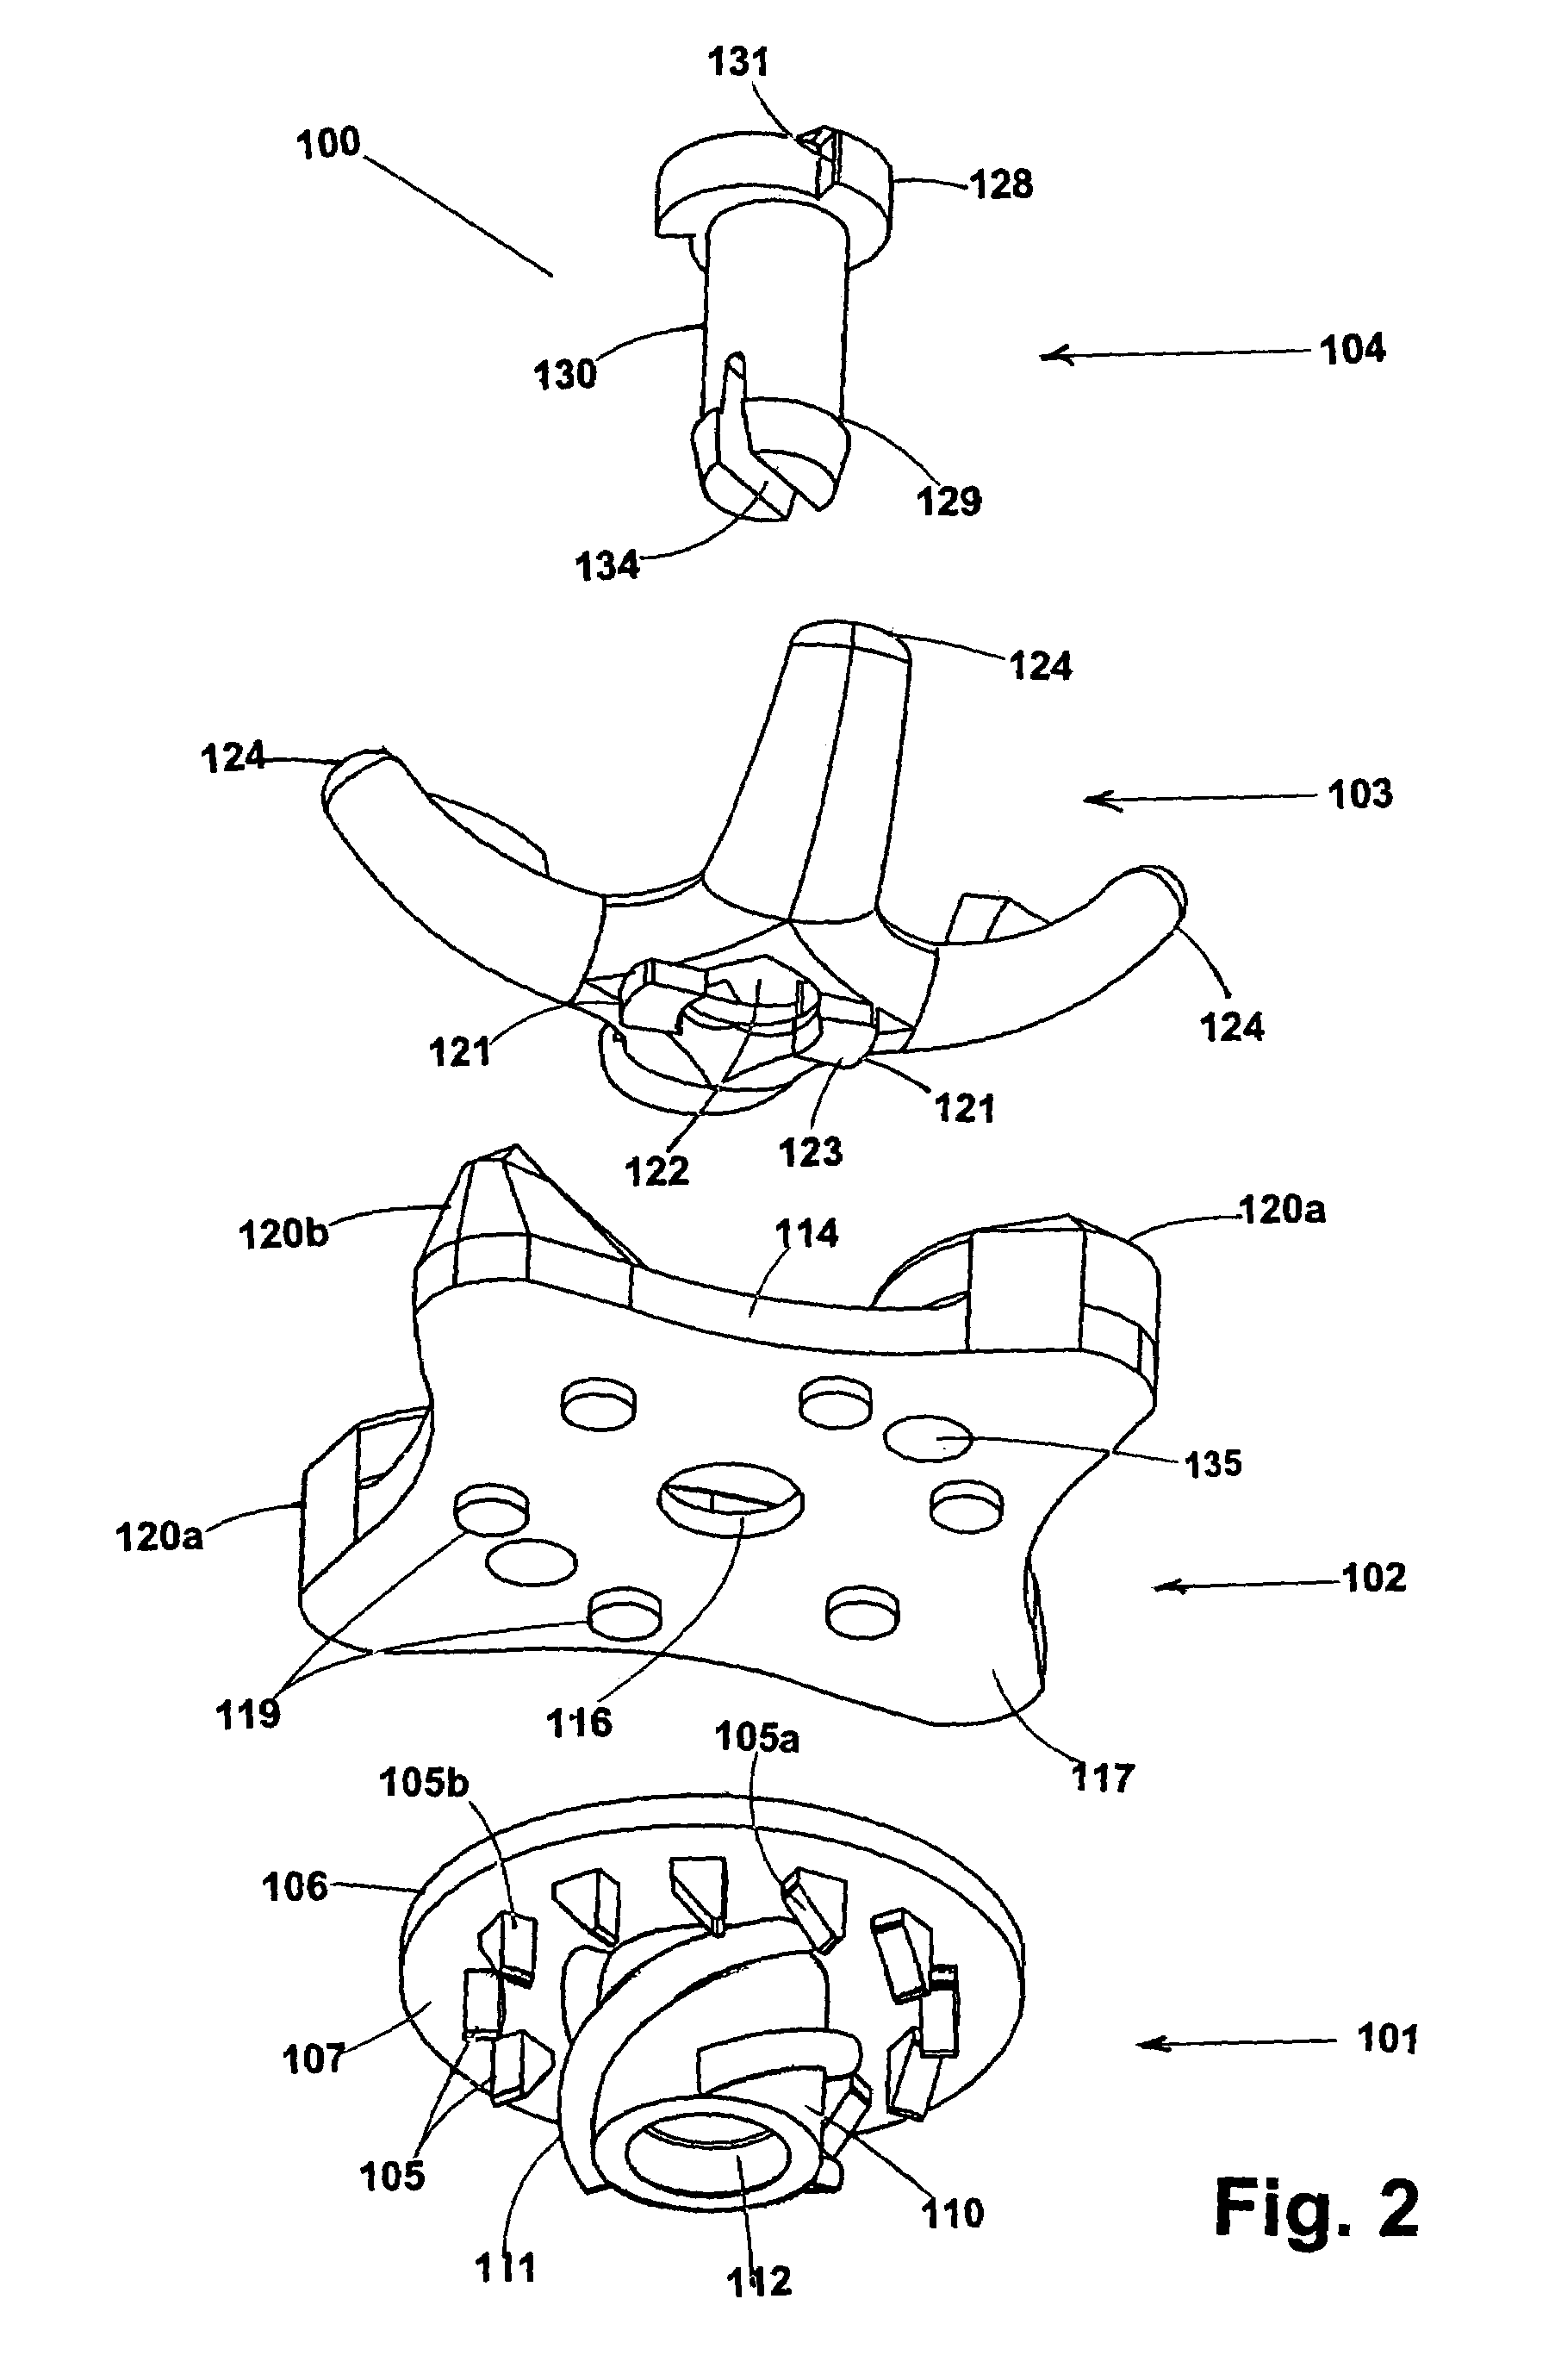 Cleat assembly for golf shoe